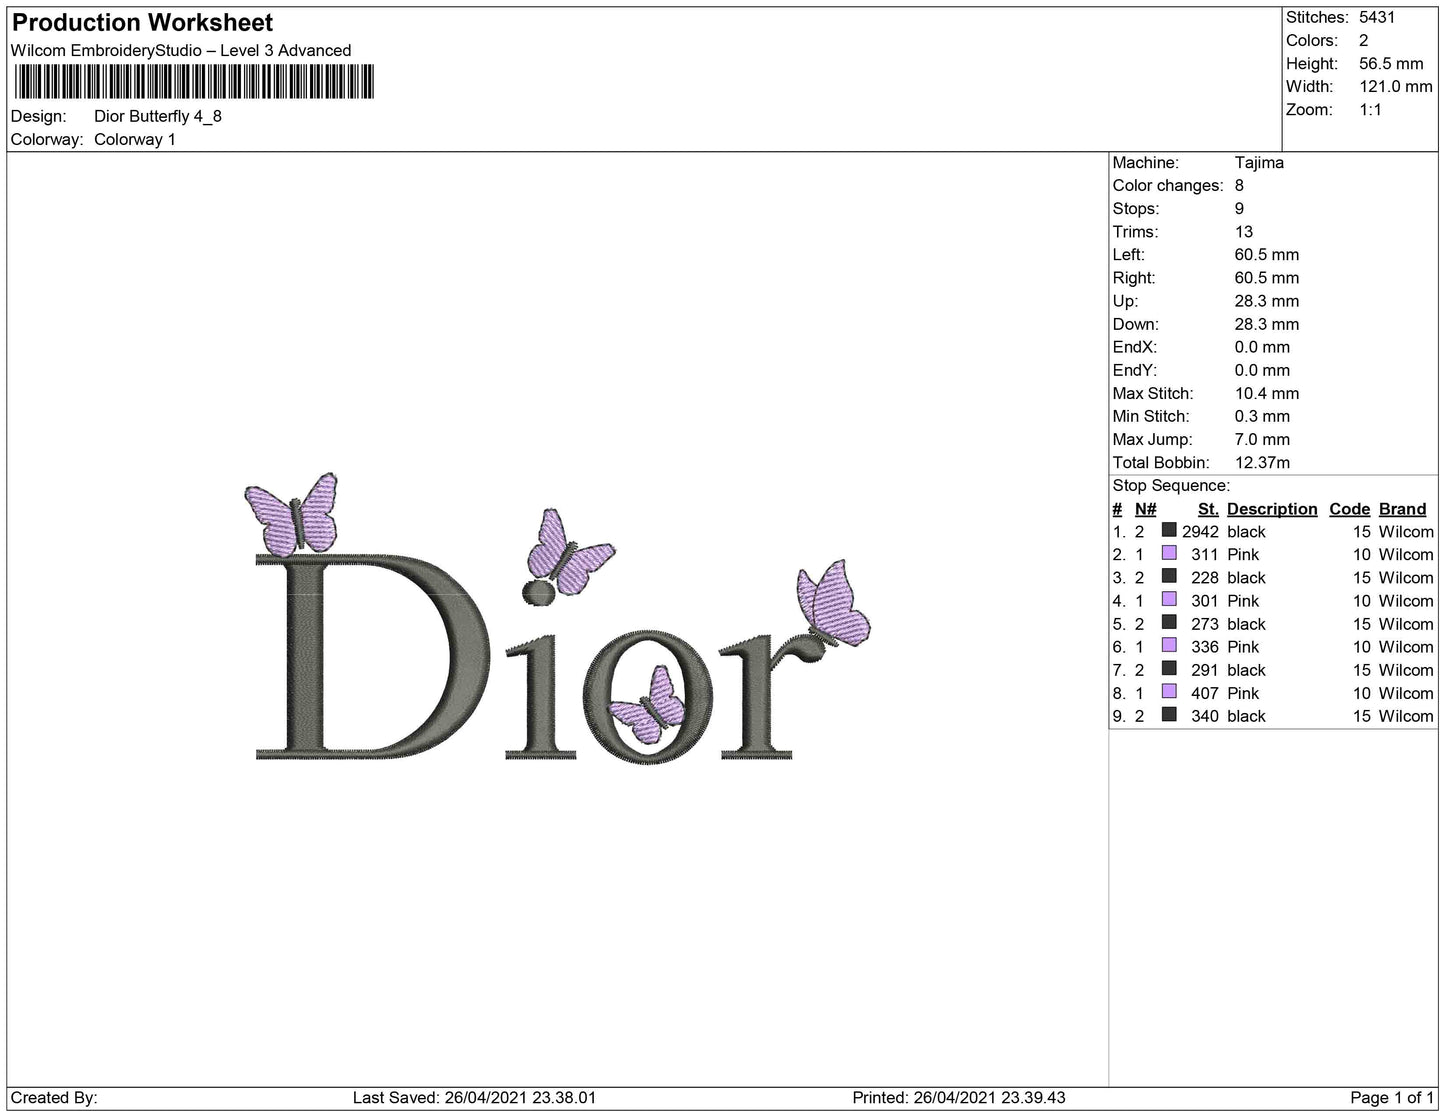 Dior Butterfly